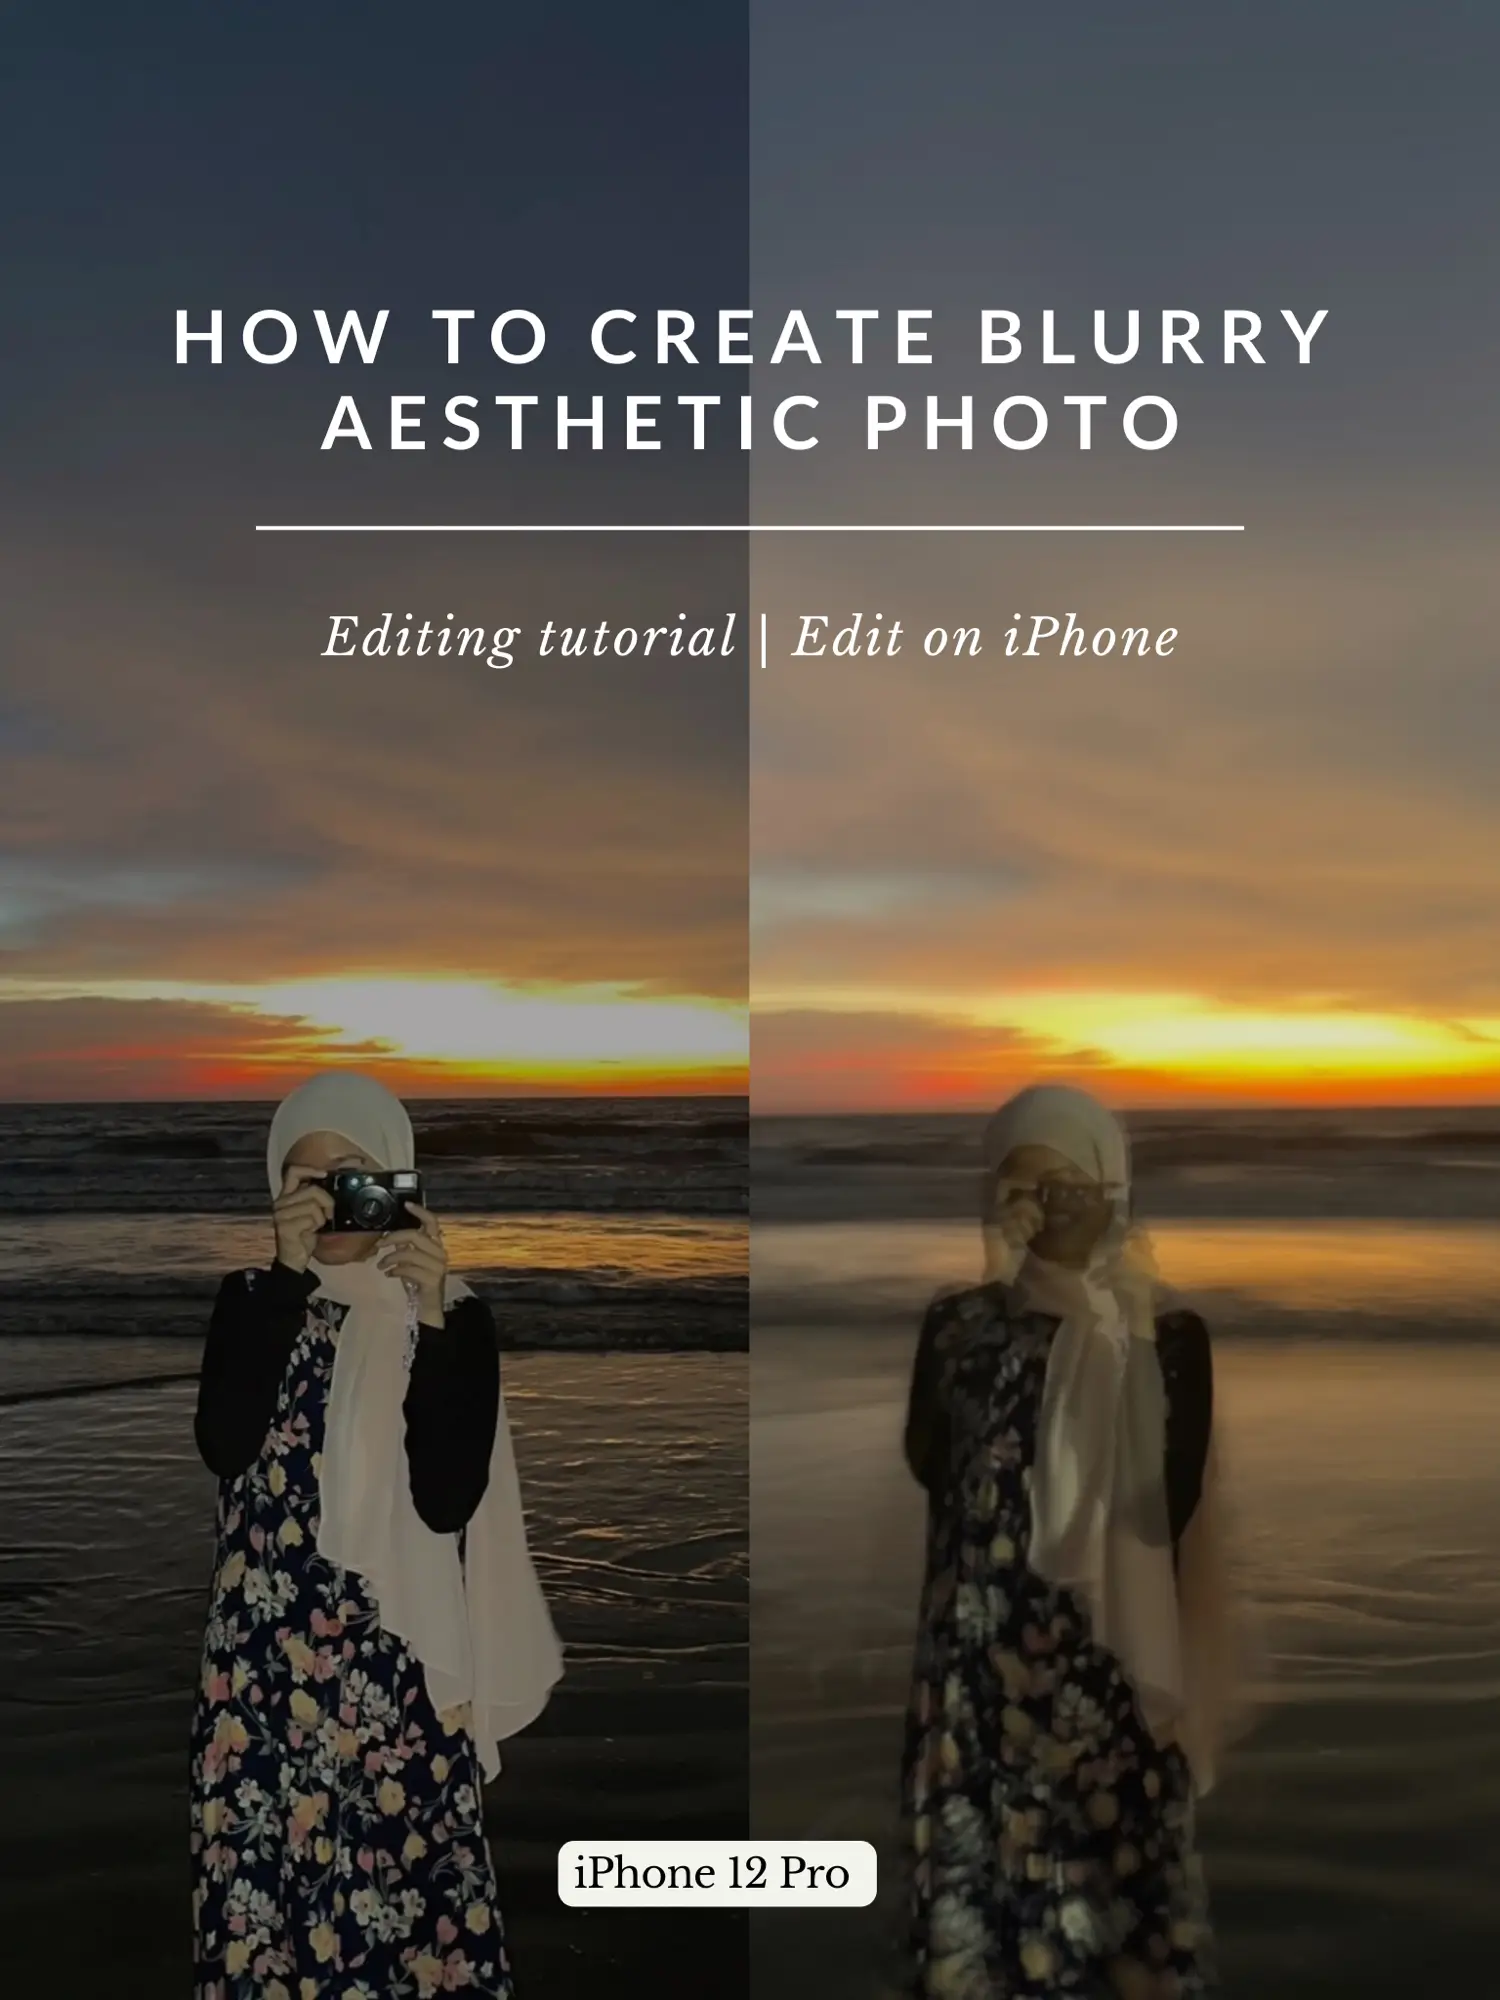 Defining Blur in Photography